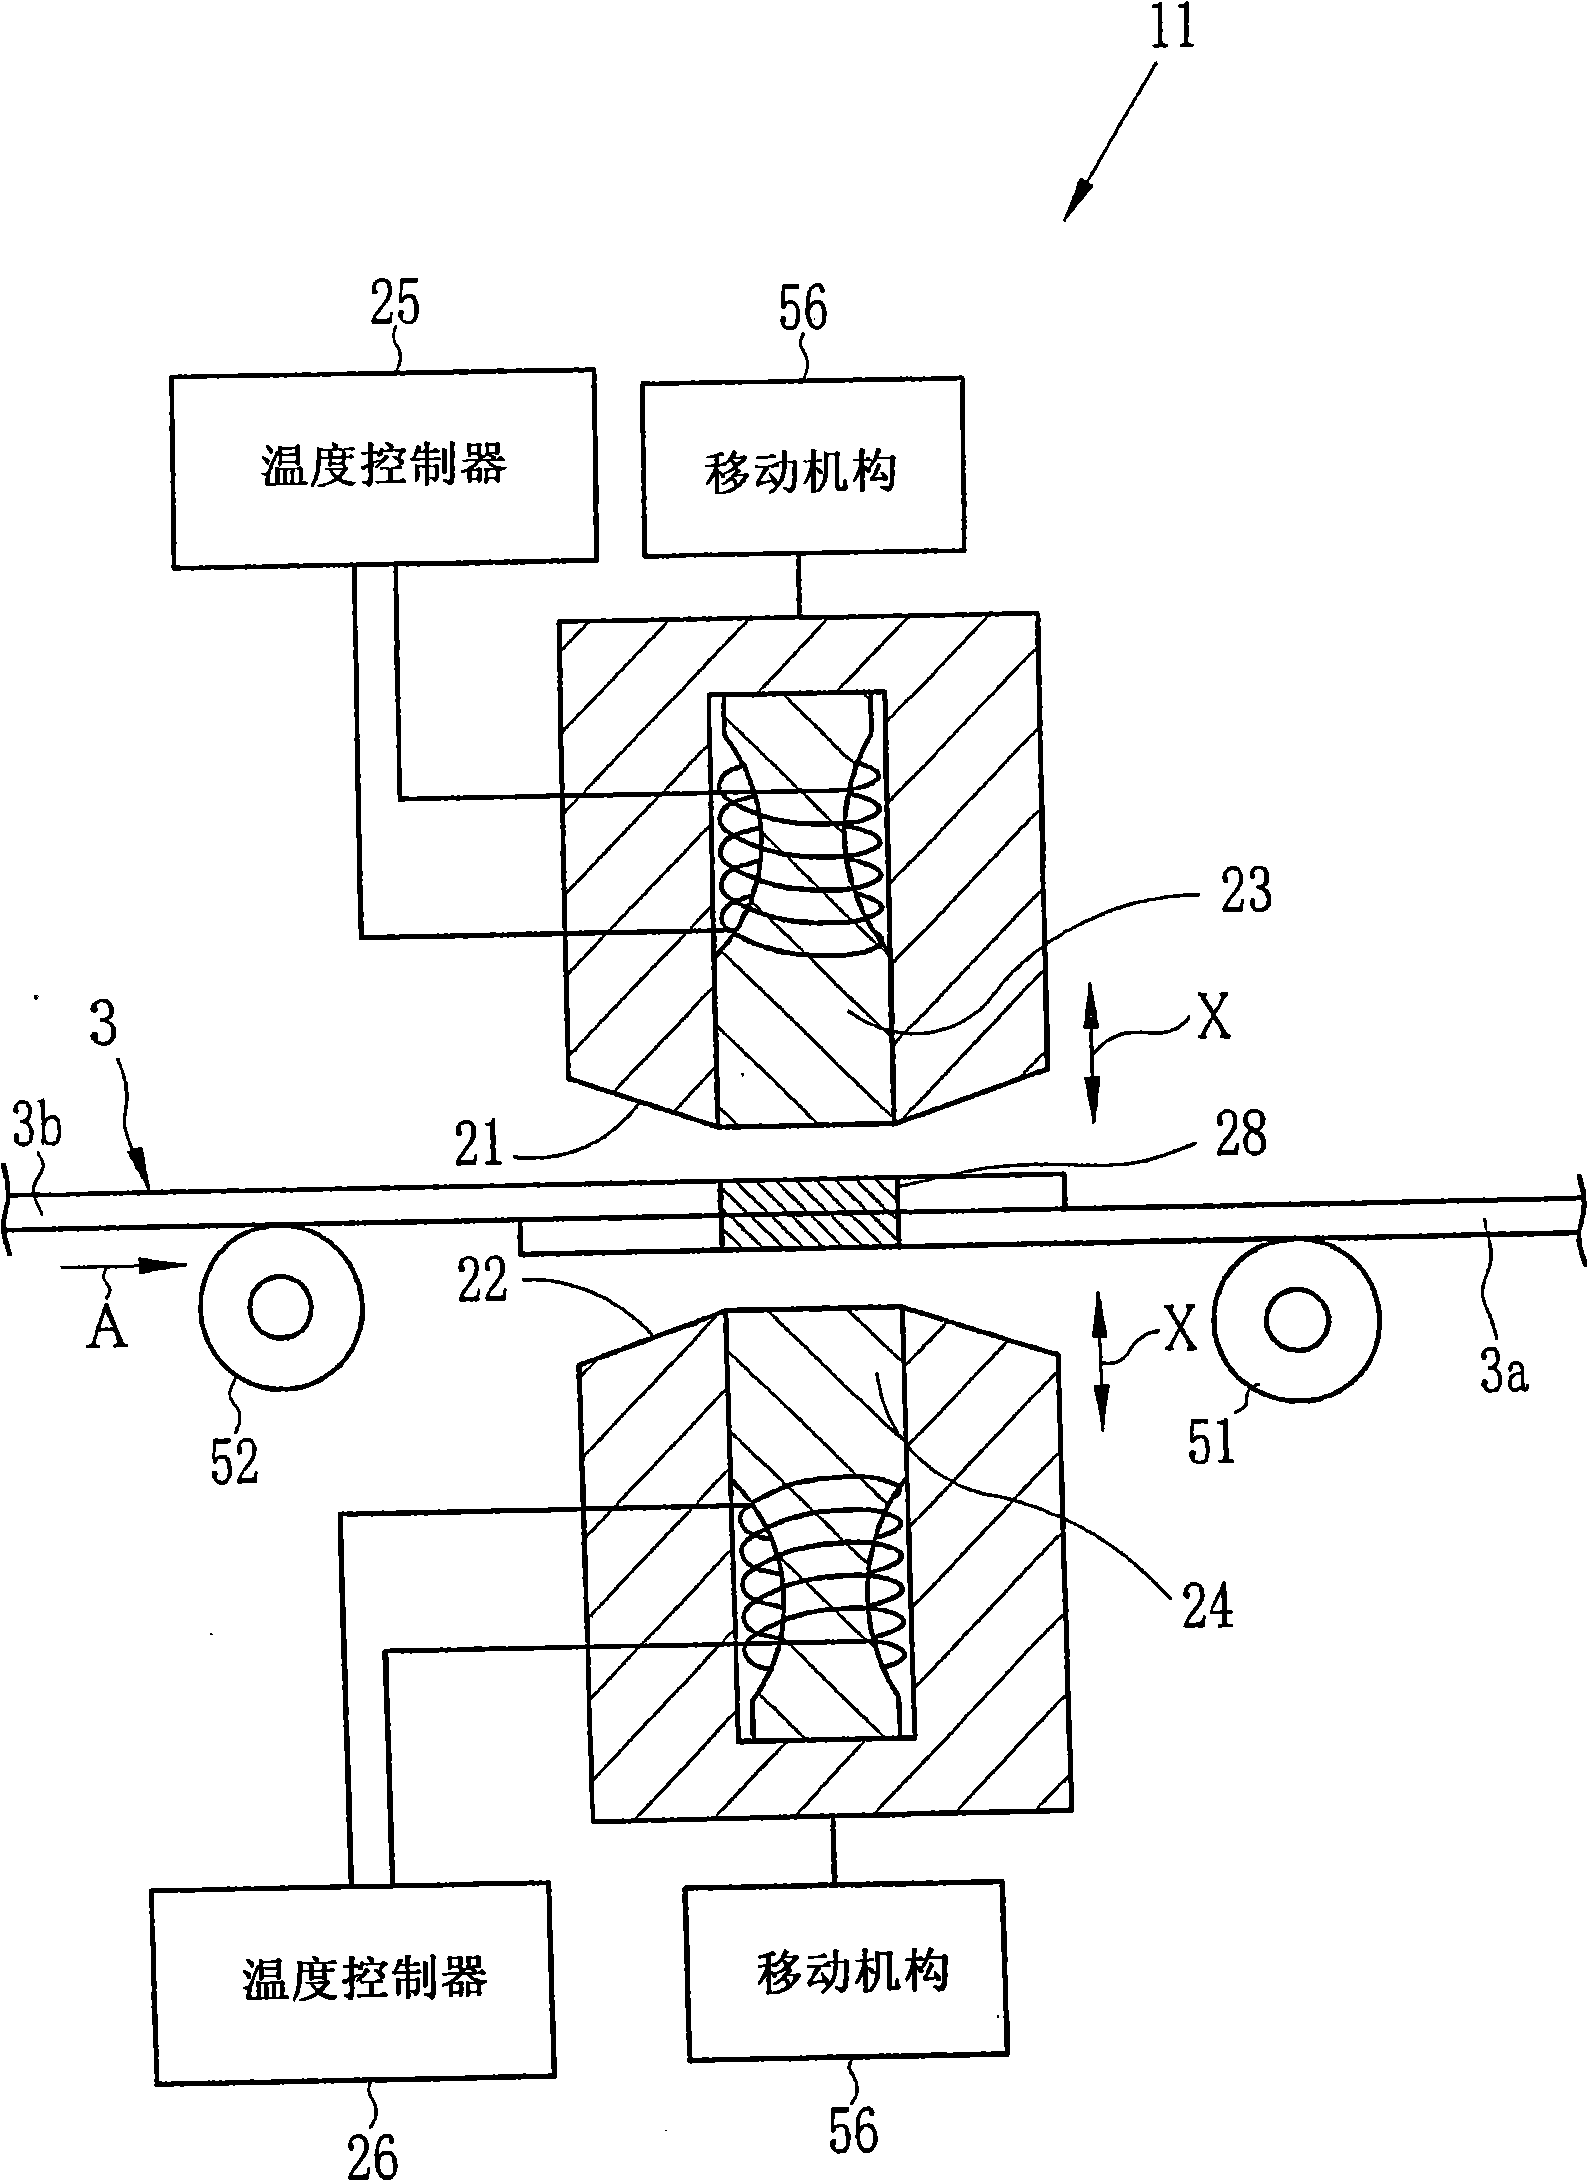 Polymer film splicing method and device, and stretching method